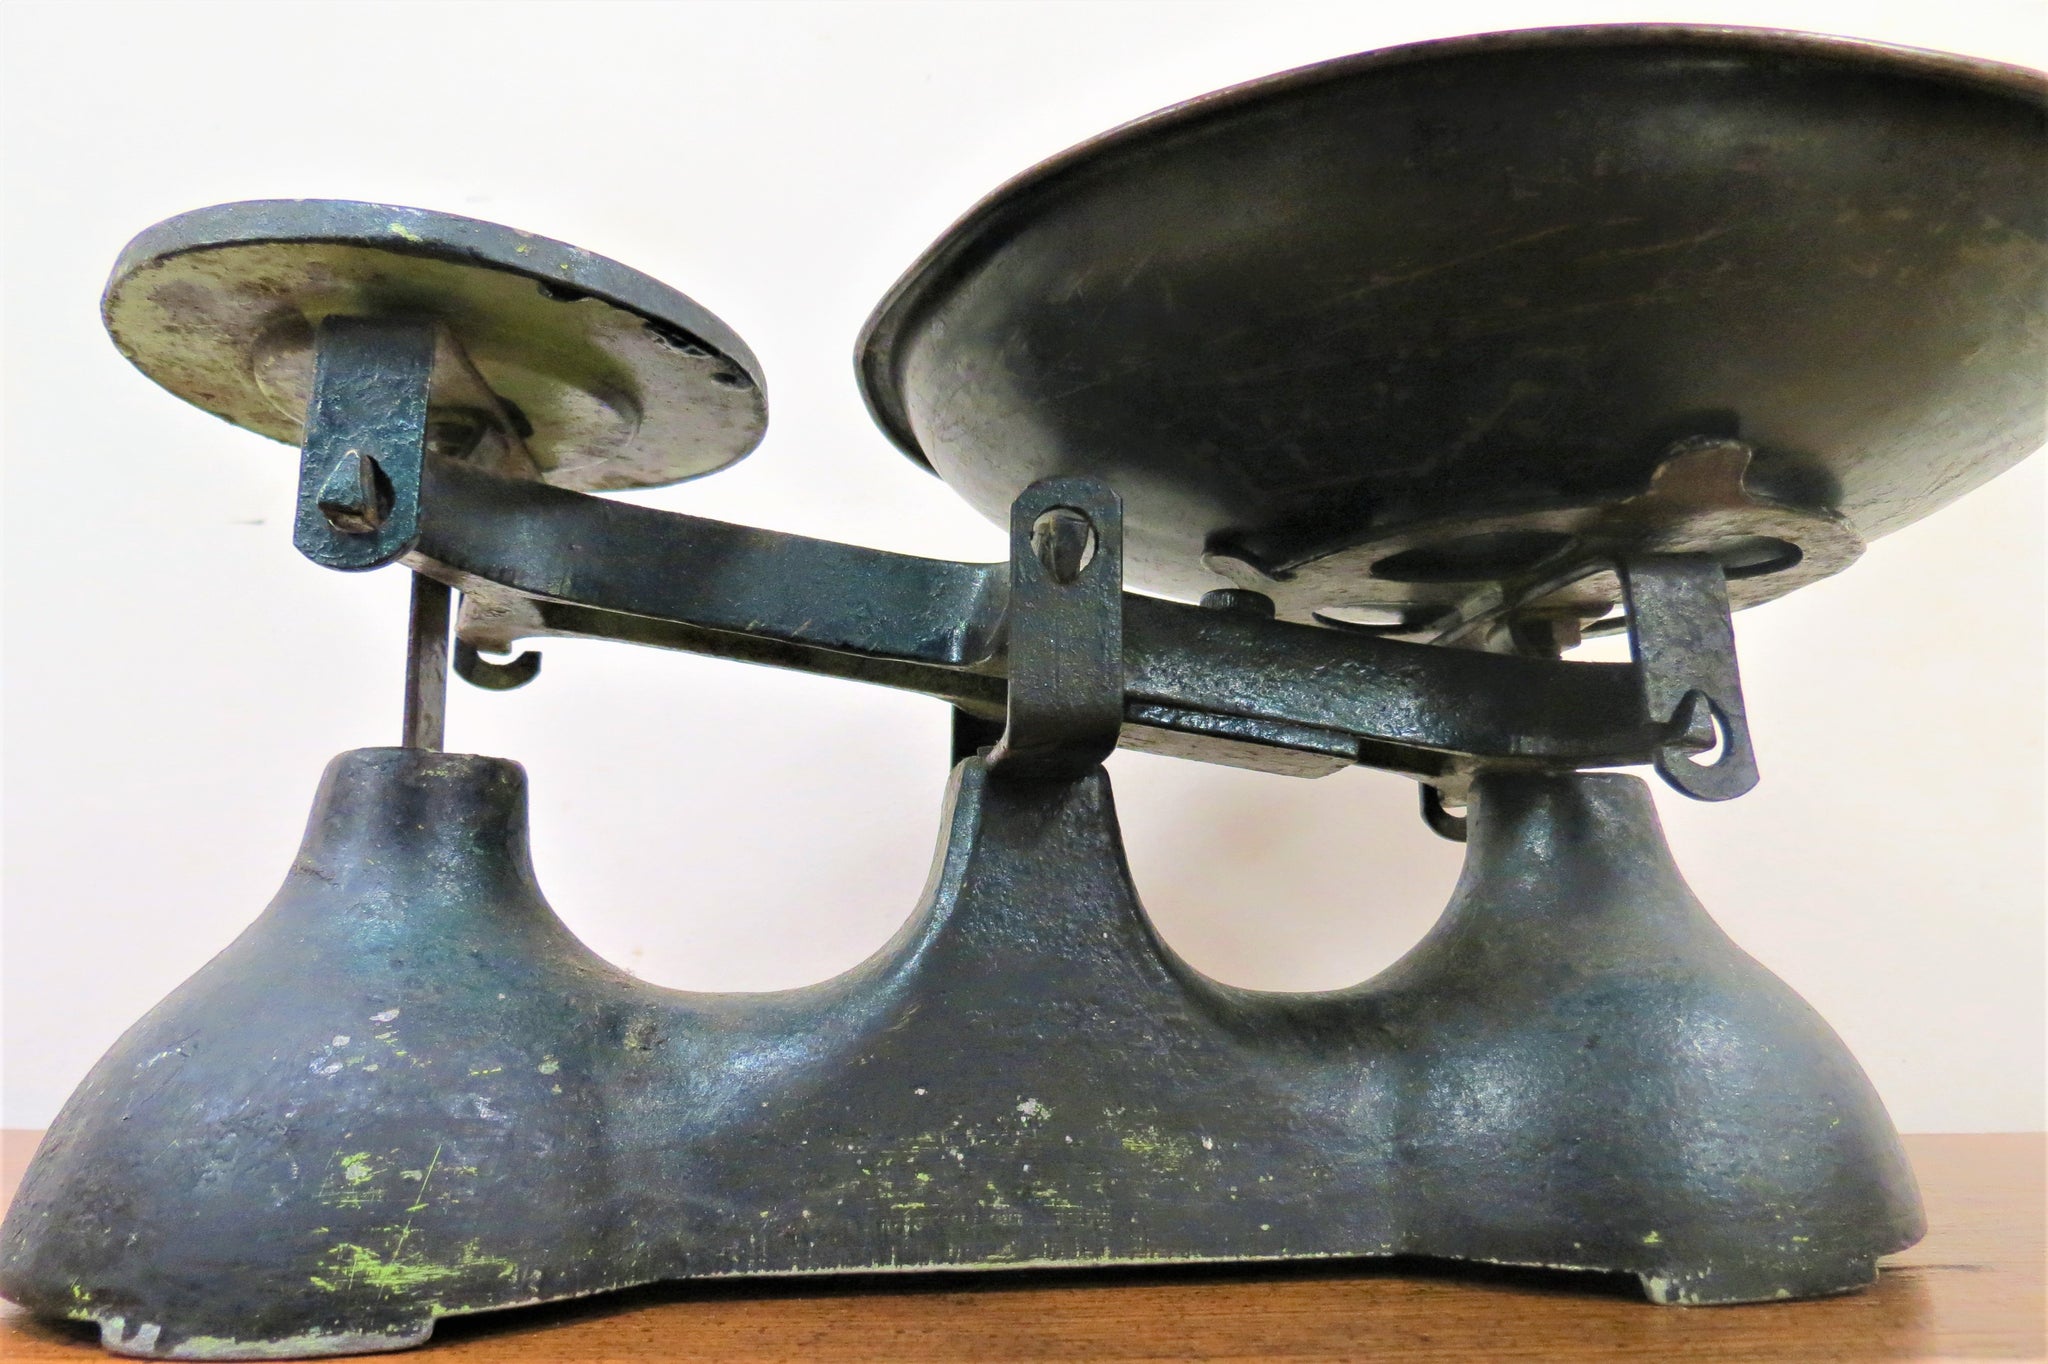 Antique american iron balance weighing scale with weights